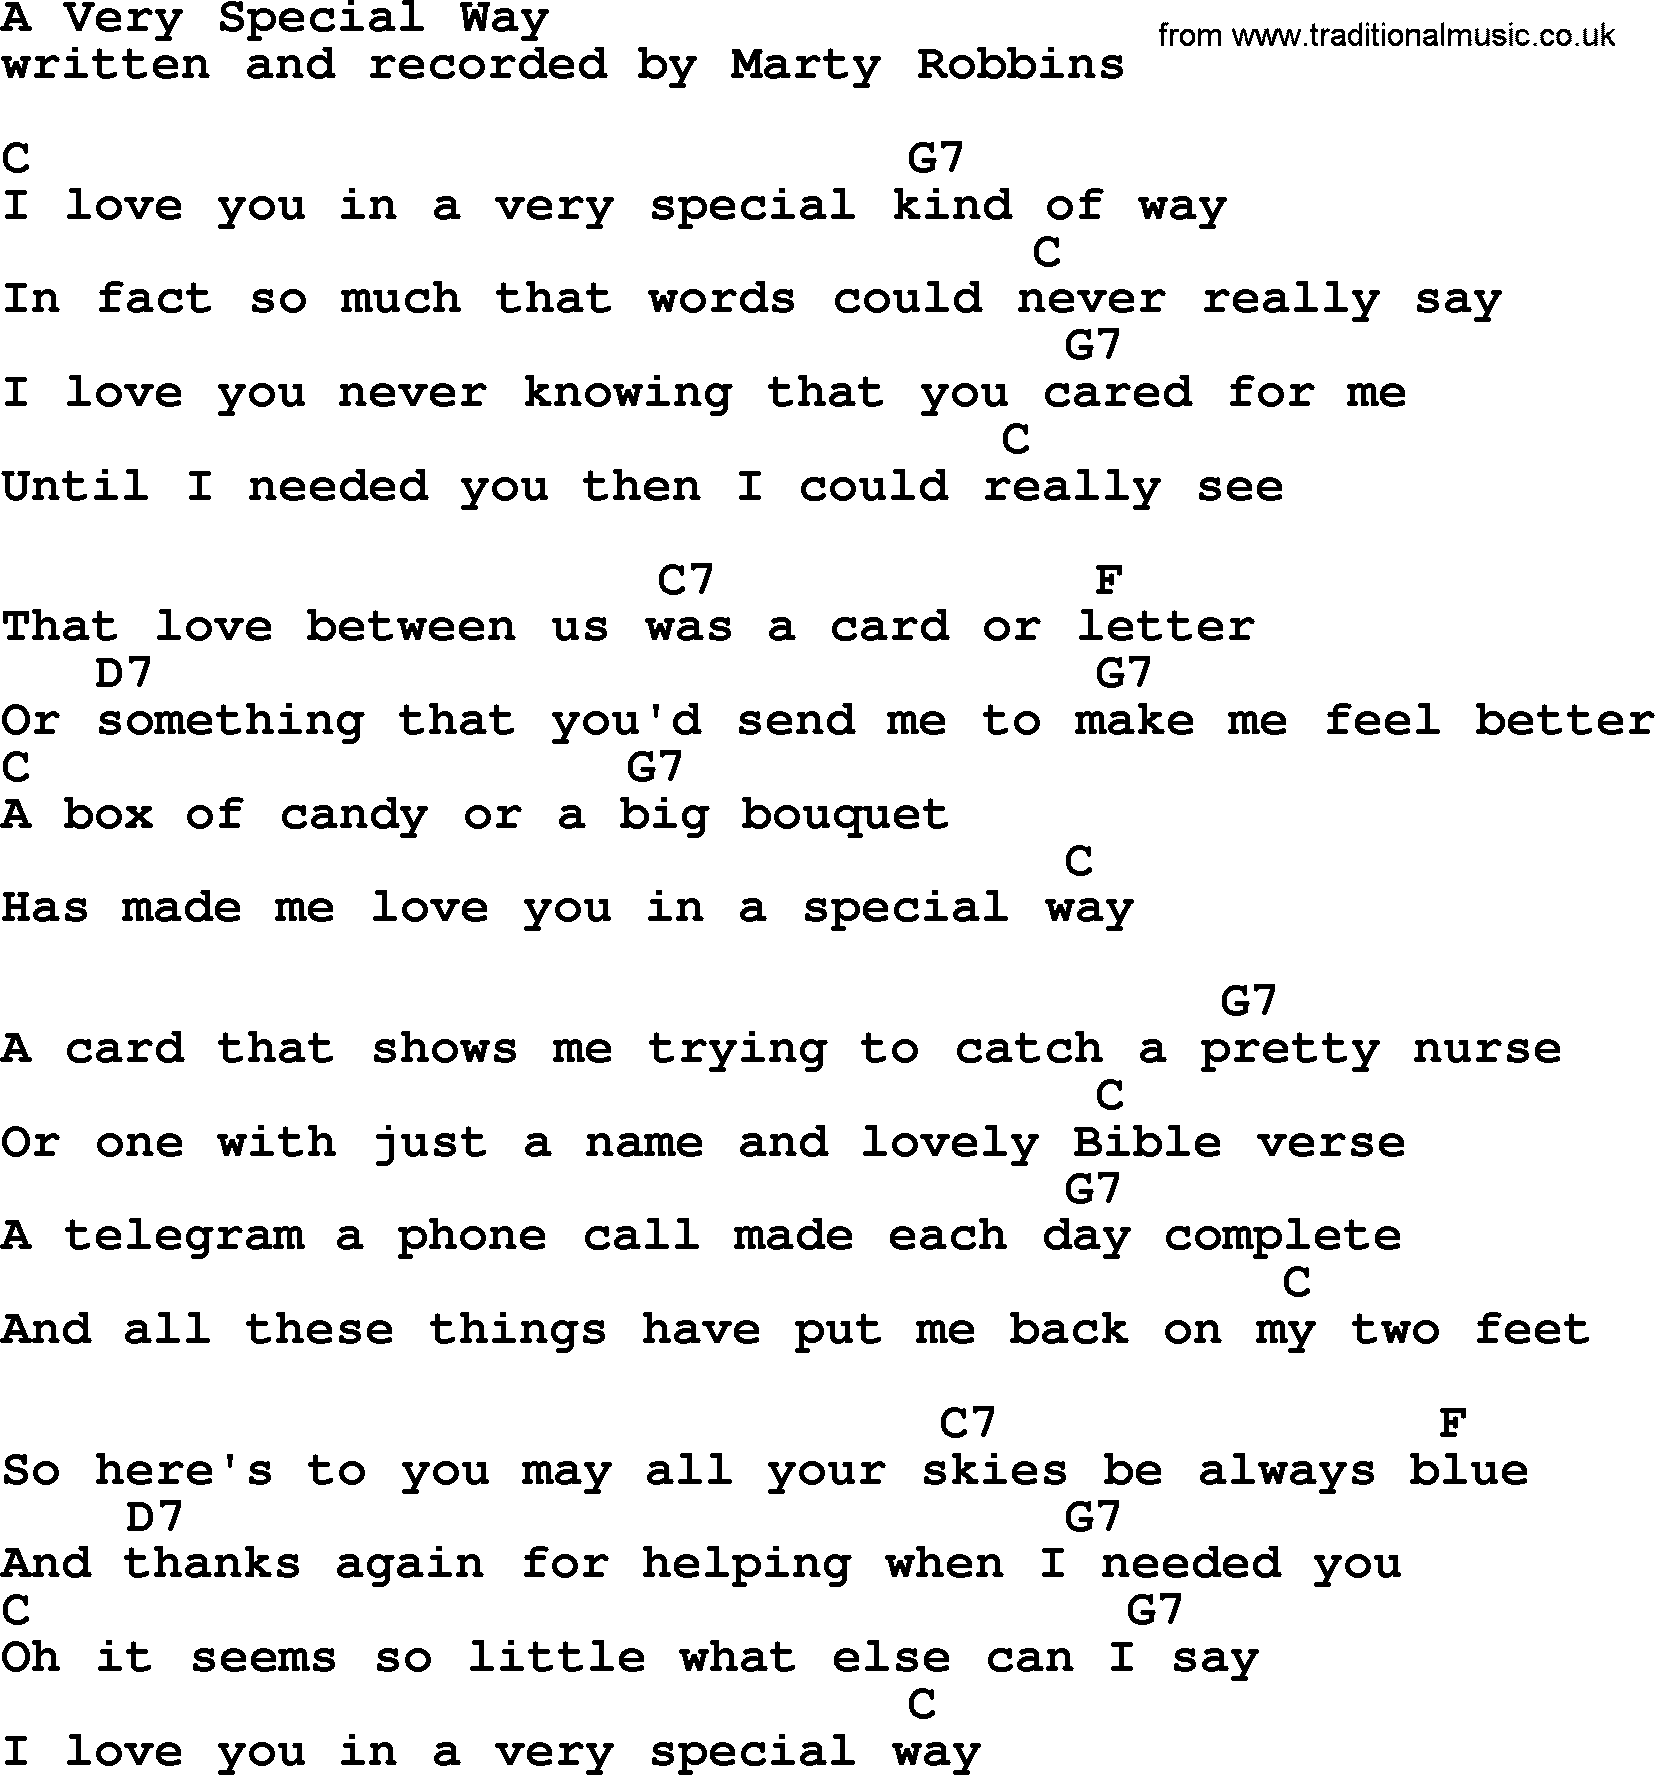 Marty Robbins song: A Very Special Way, lyrics and chords